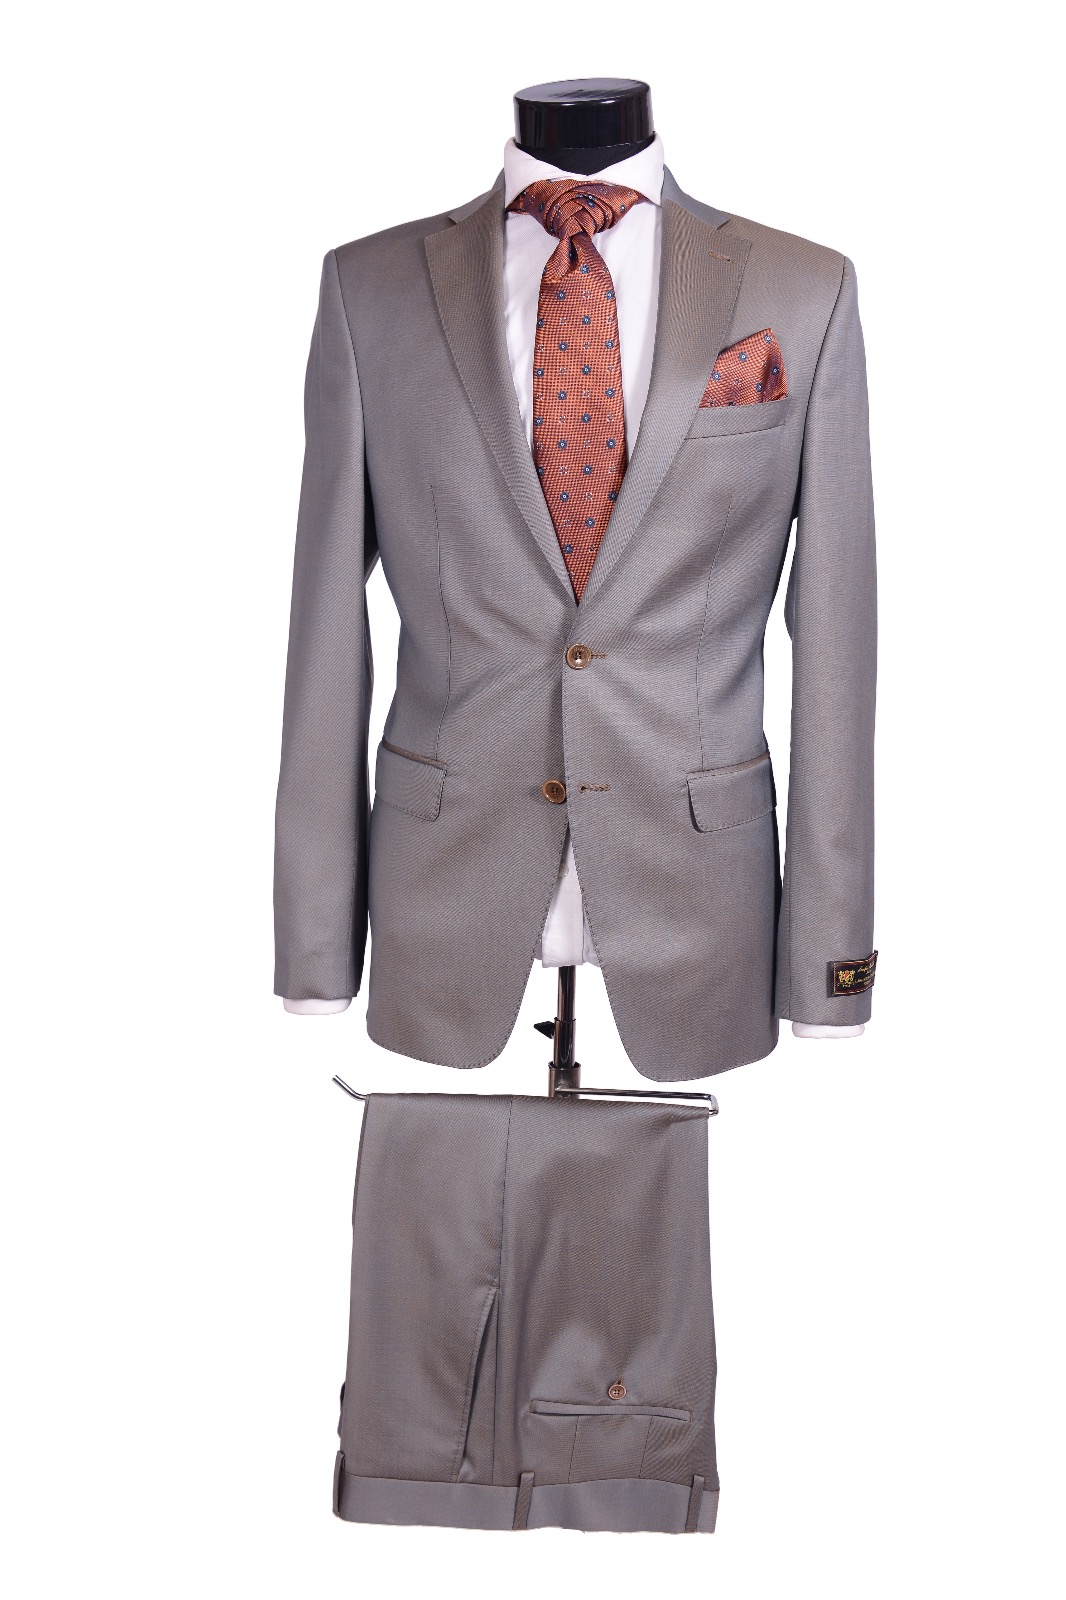 BEIGE SINGLE BREASTED CLASSIC SUIT